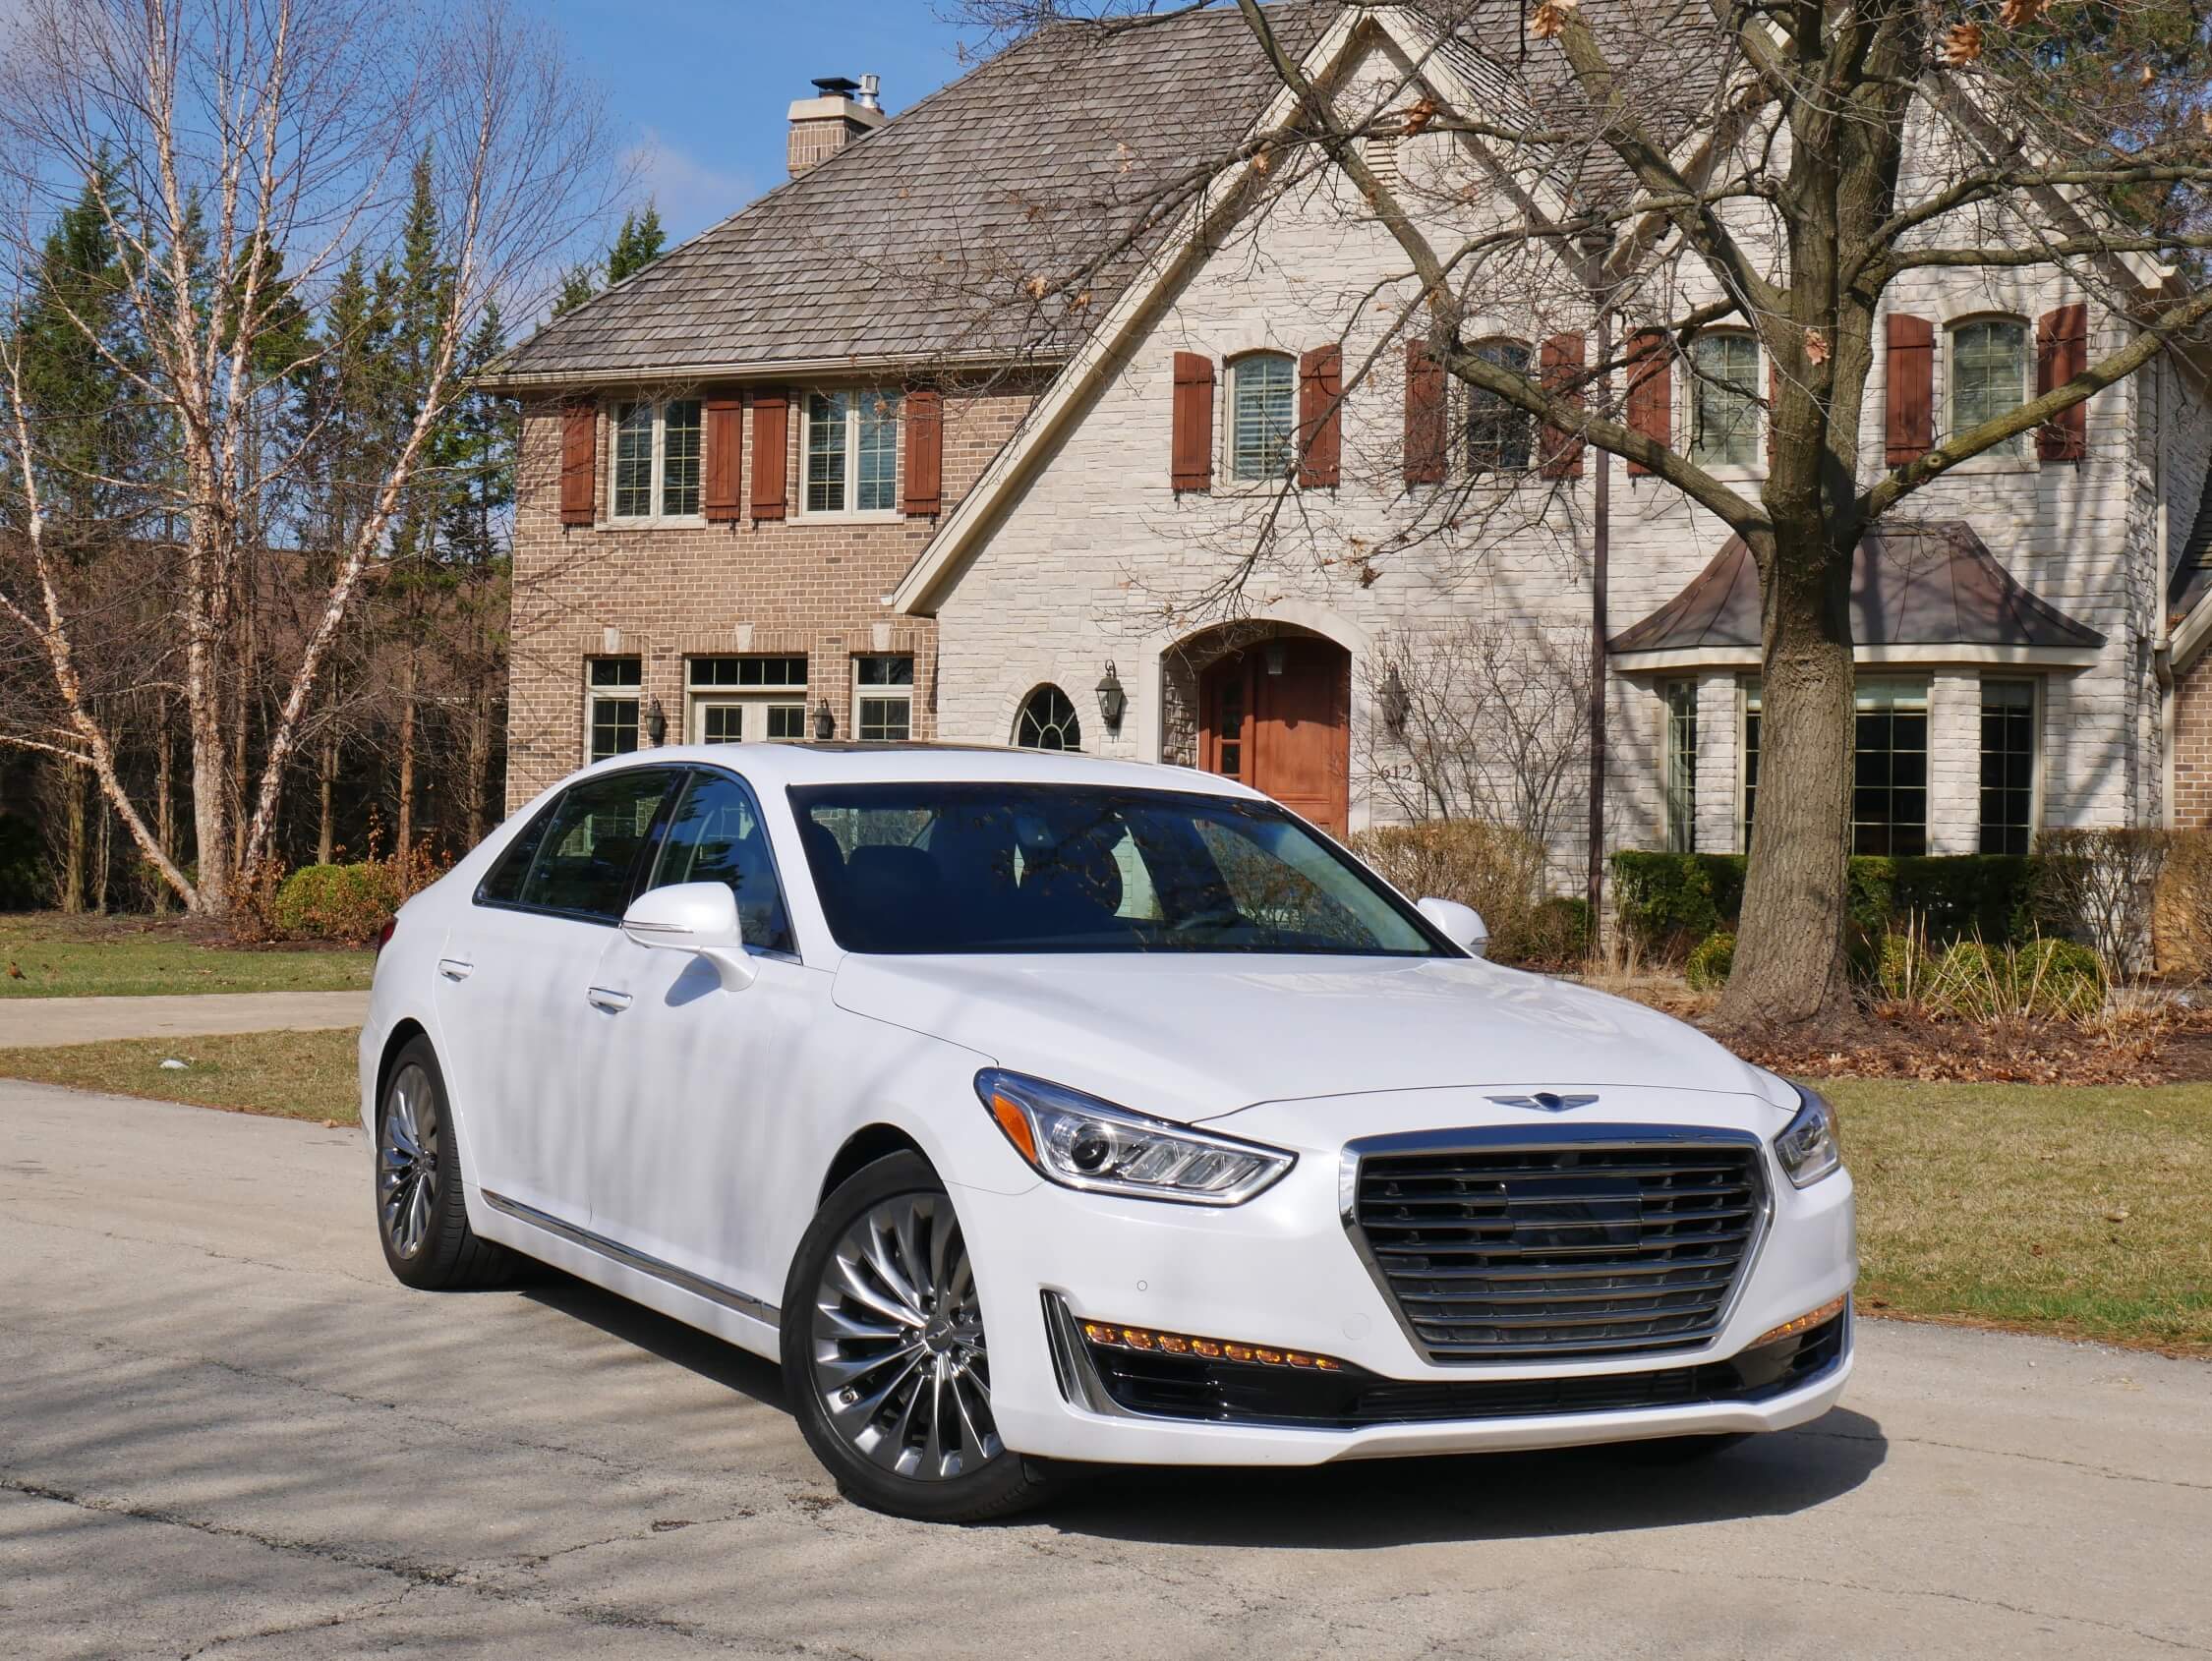 2018 Genesis G90 3.3T AWD: Chapter 3 in the First Book of Korean Luxobarge